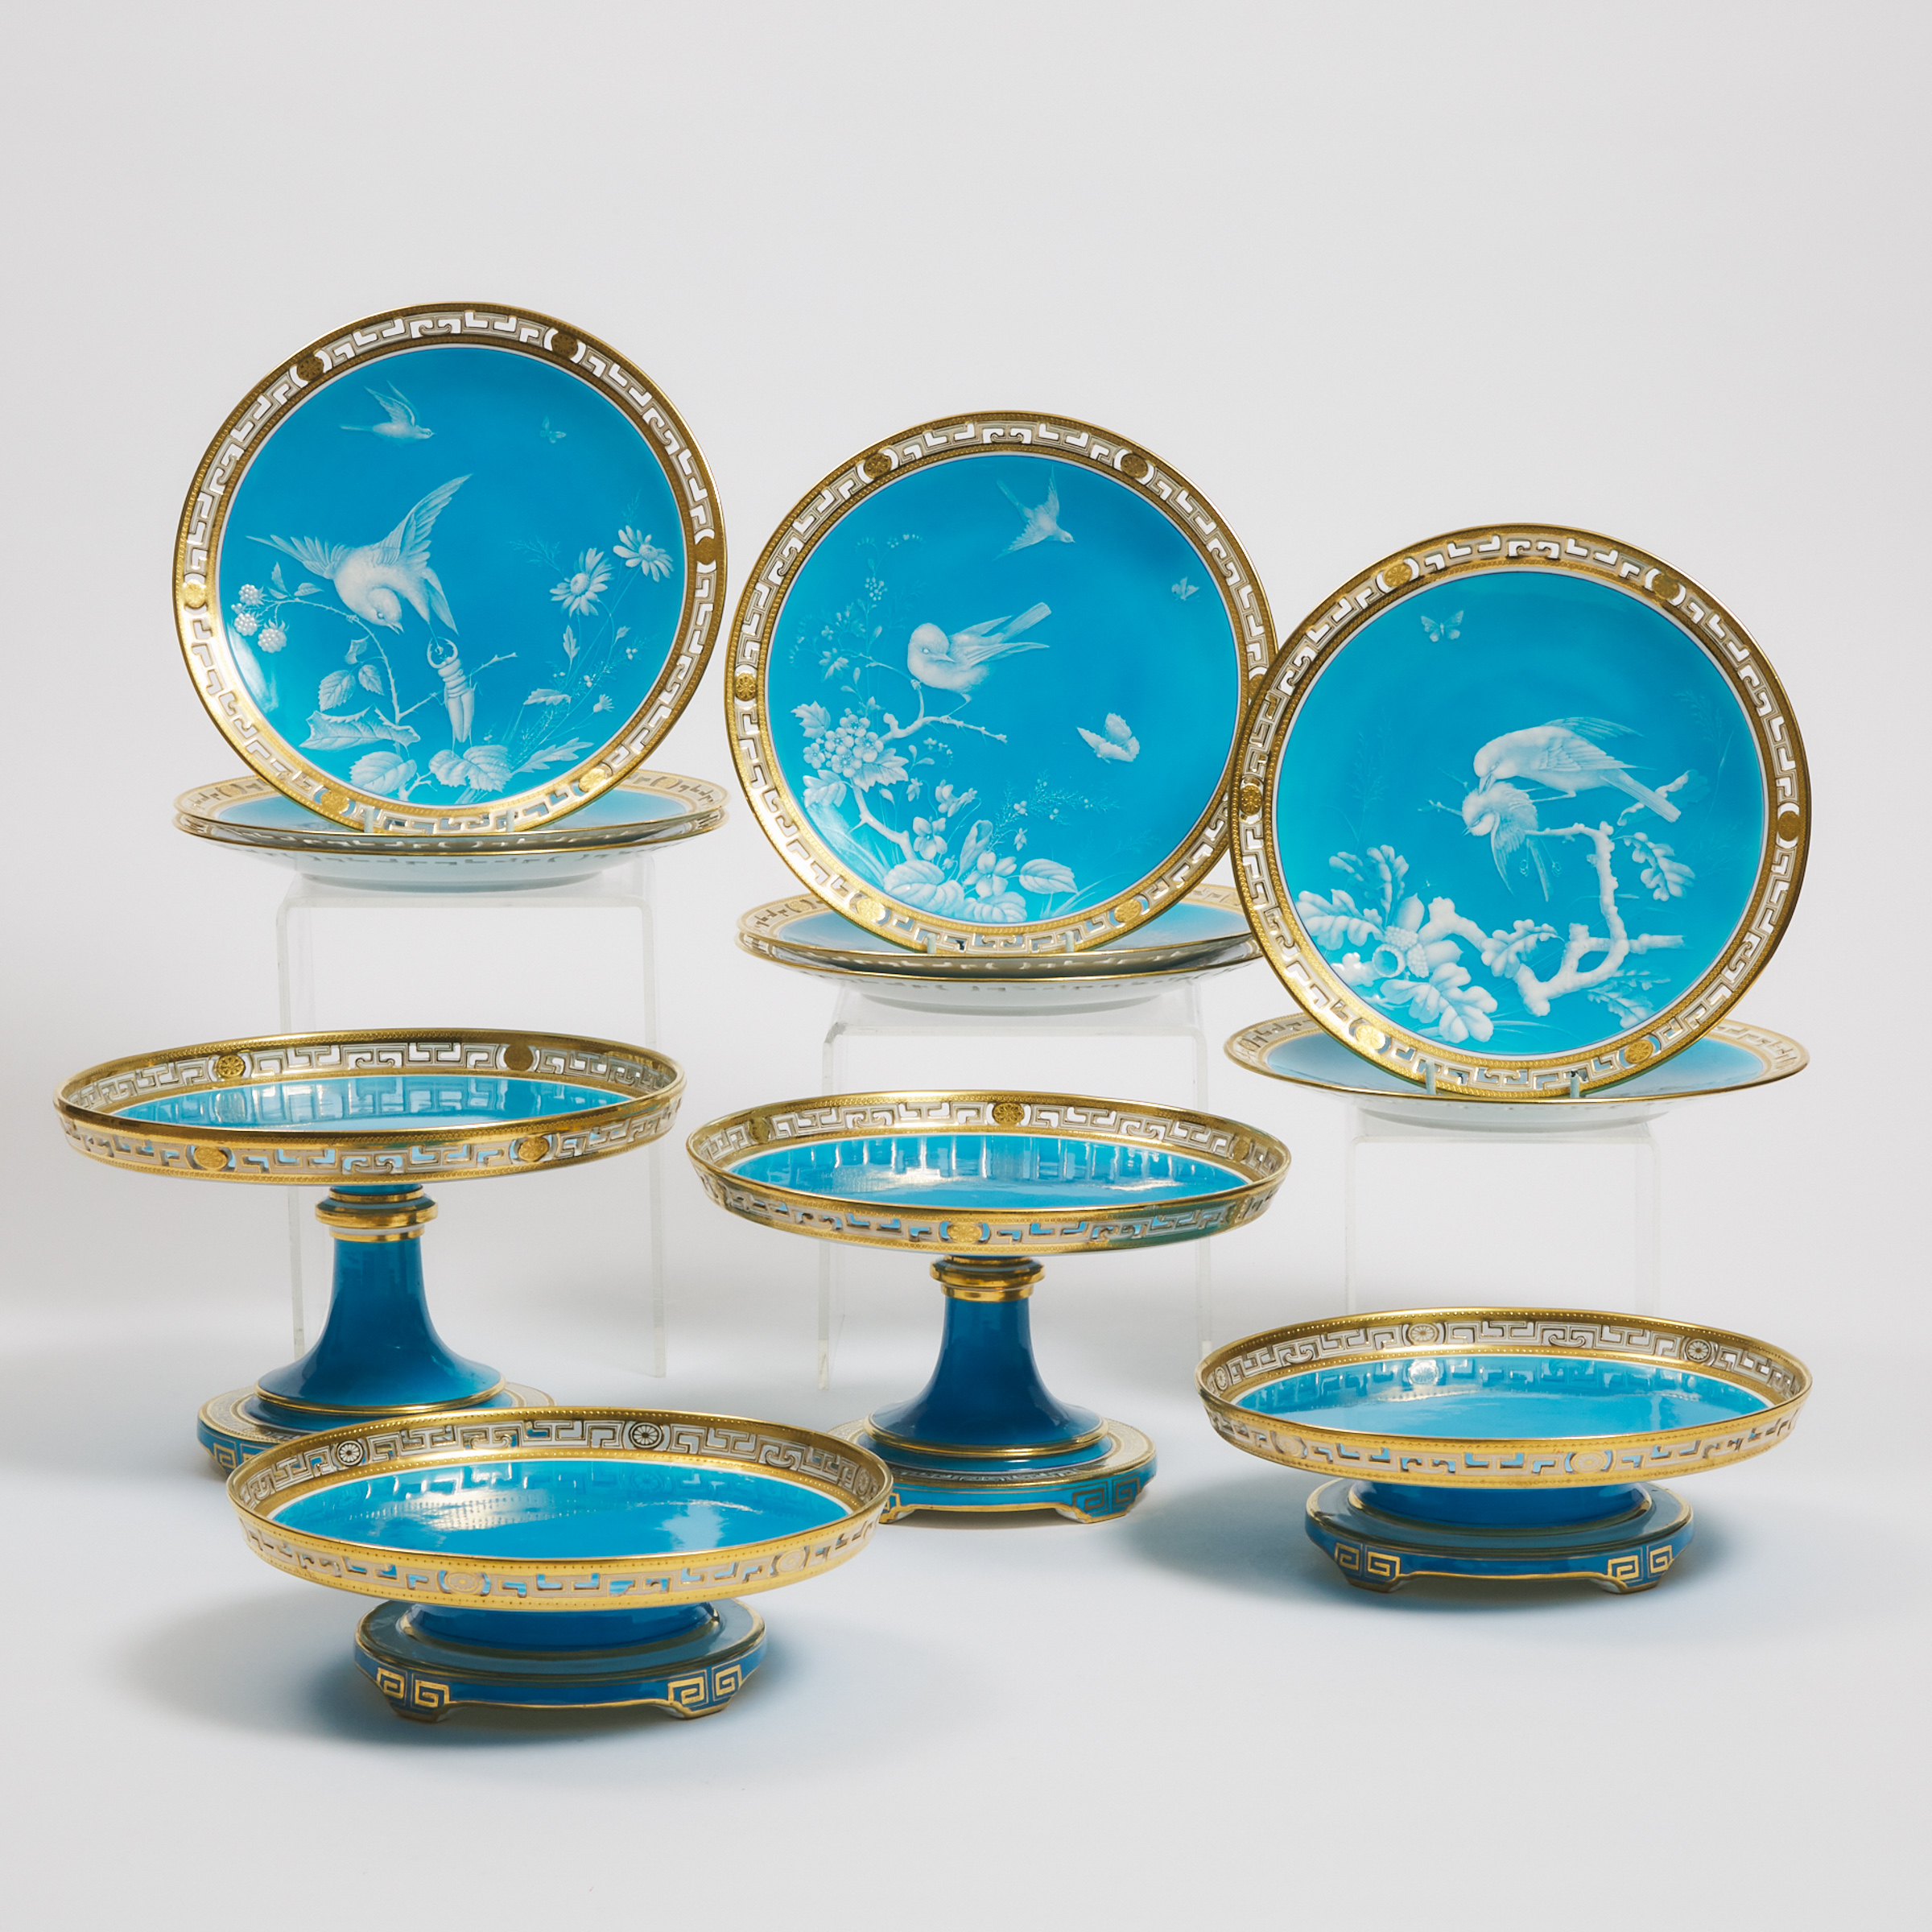 Minton Turqoise Ground Dessert Service, attributed to Désiré Leroy, c.1880